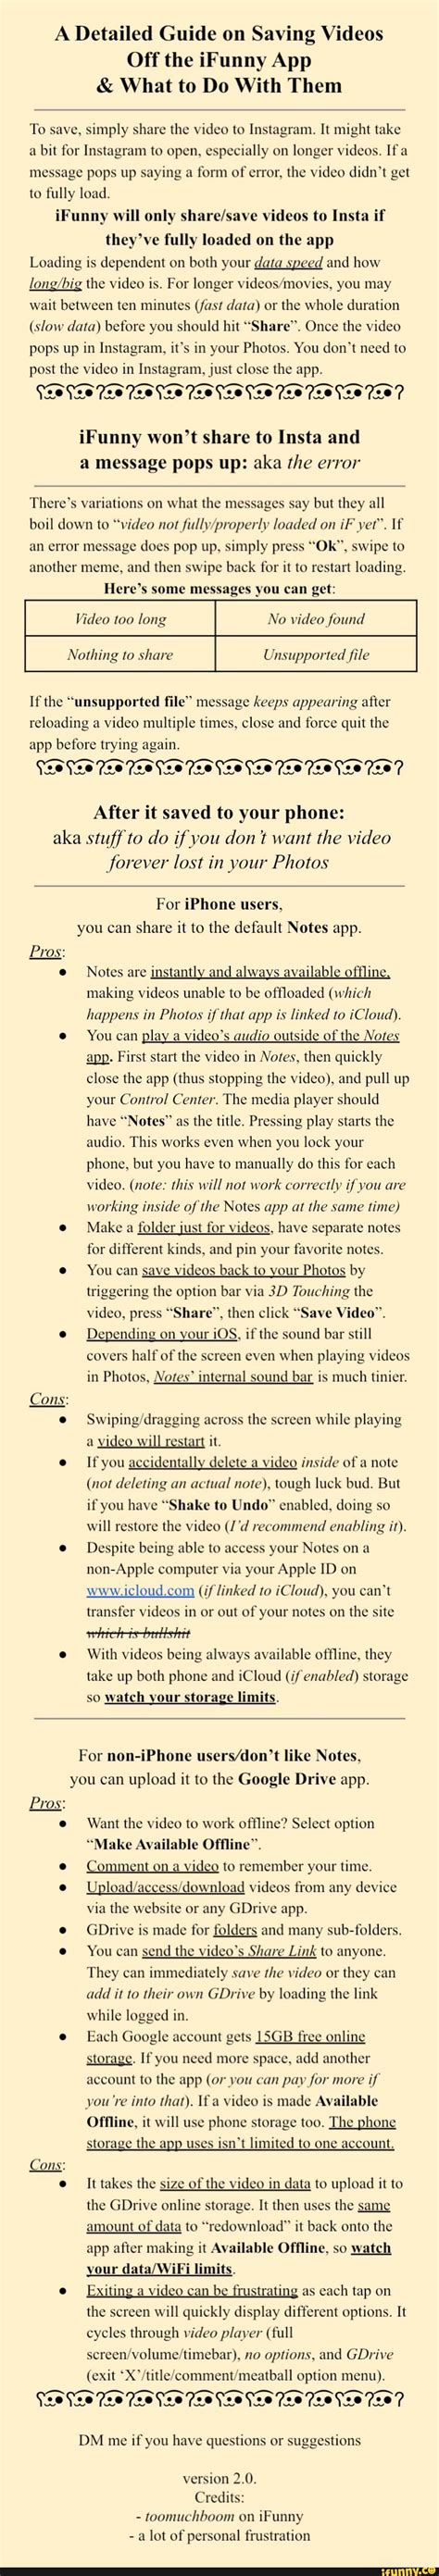 a guide to saving videos from here the ifunny app